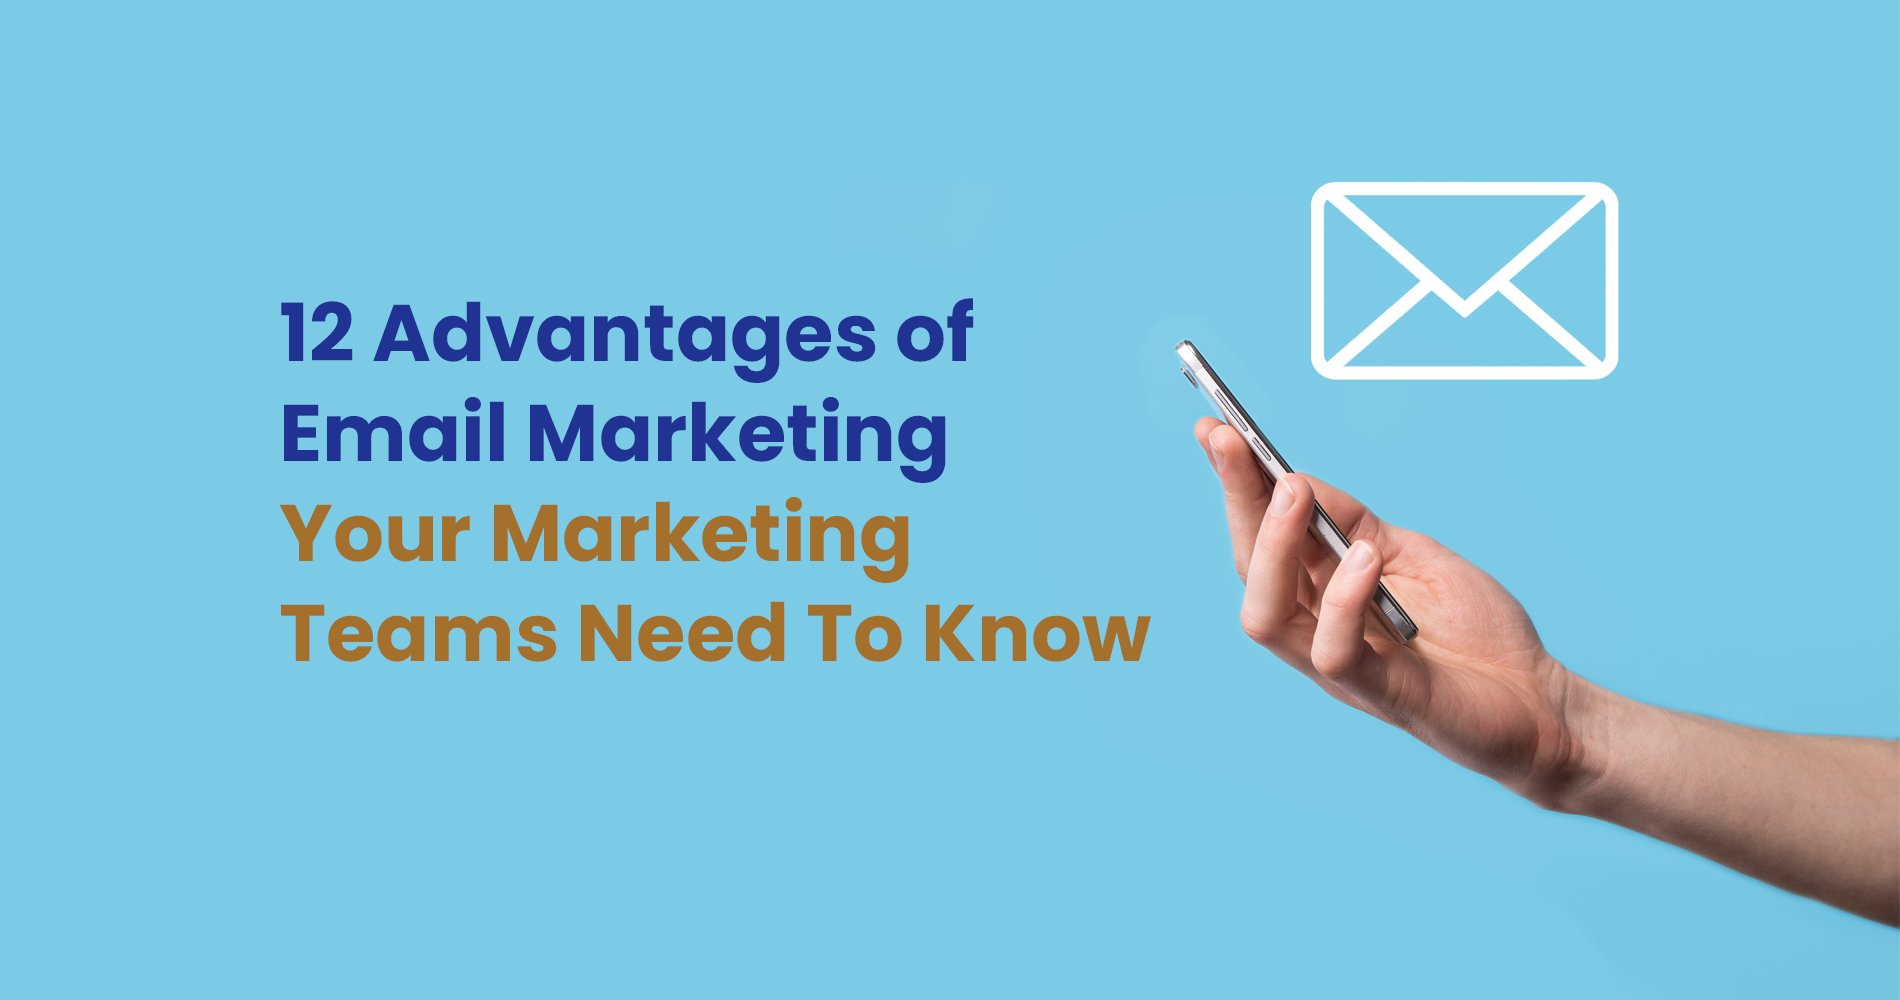 12 Advantages of Email Marketing Your Marketing Teams Need To Know